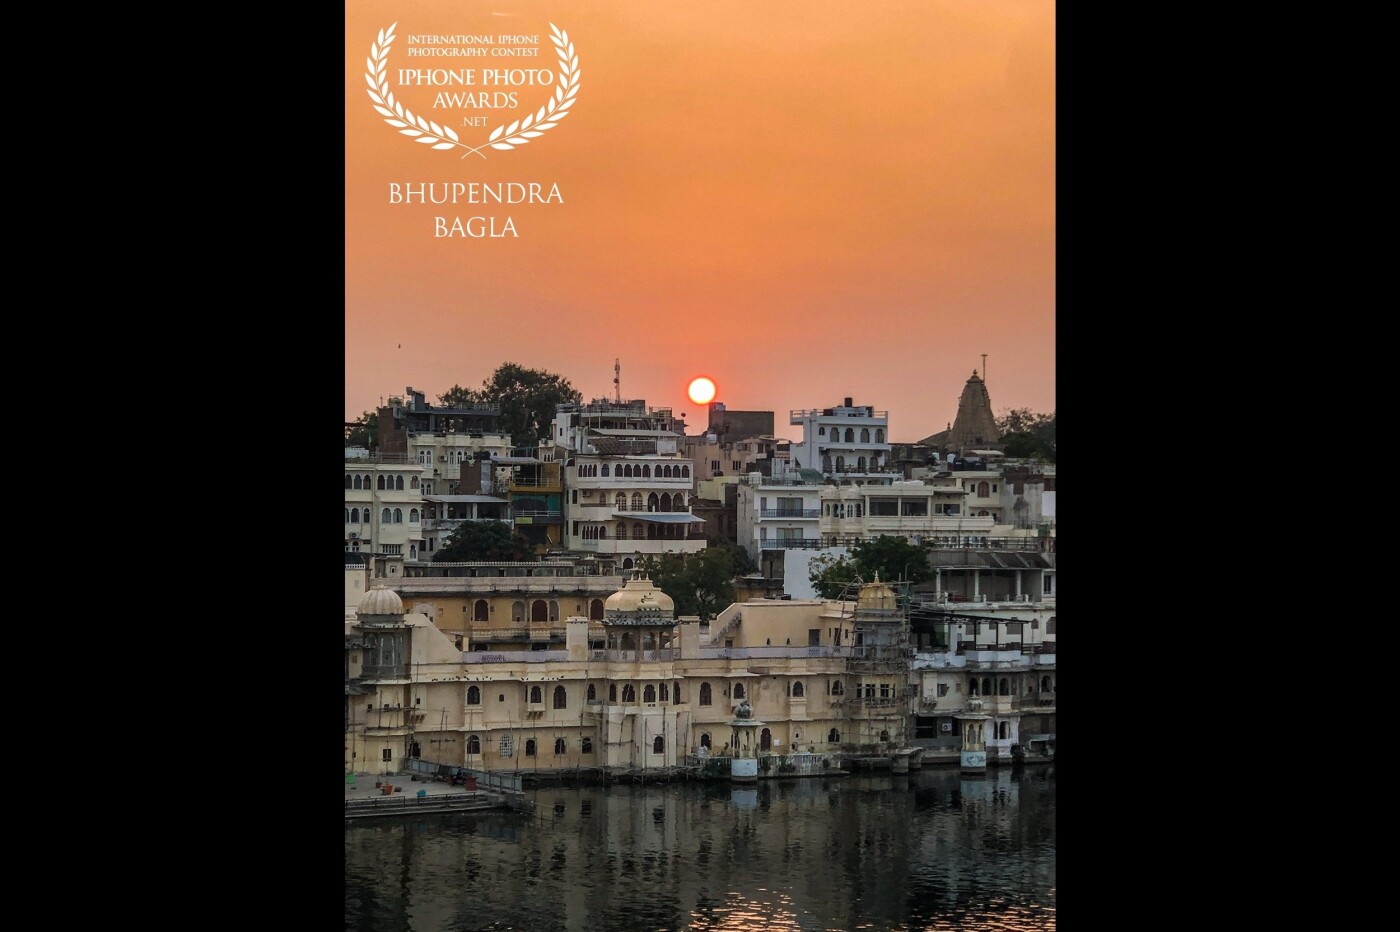 This was shot during my recent trip to Udaipur in India. Every morning I was waking up to this wonderful view and sunrise on Lake Pichola. It was a moment worth capturing and it cannot get more Devine than this. 